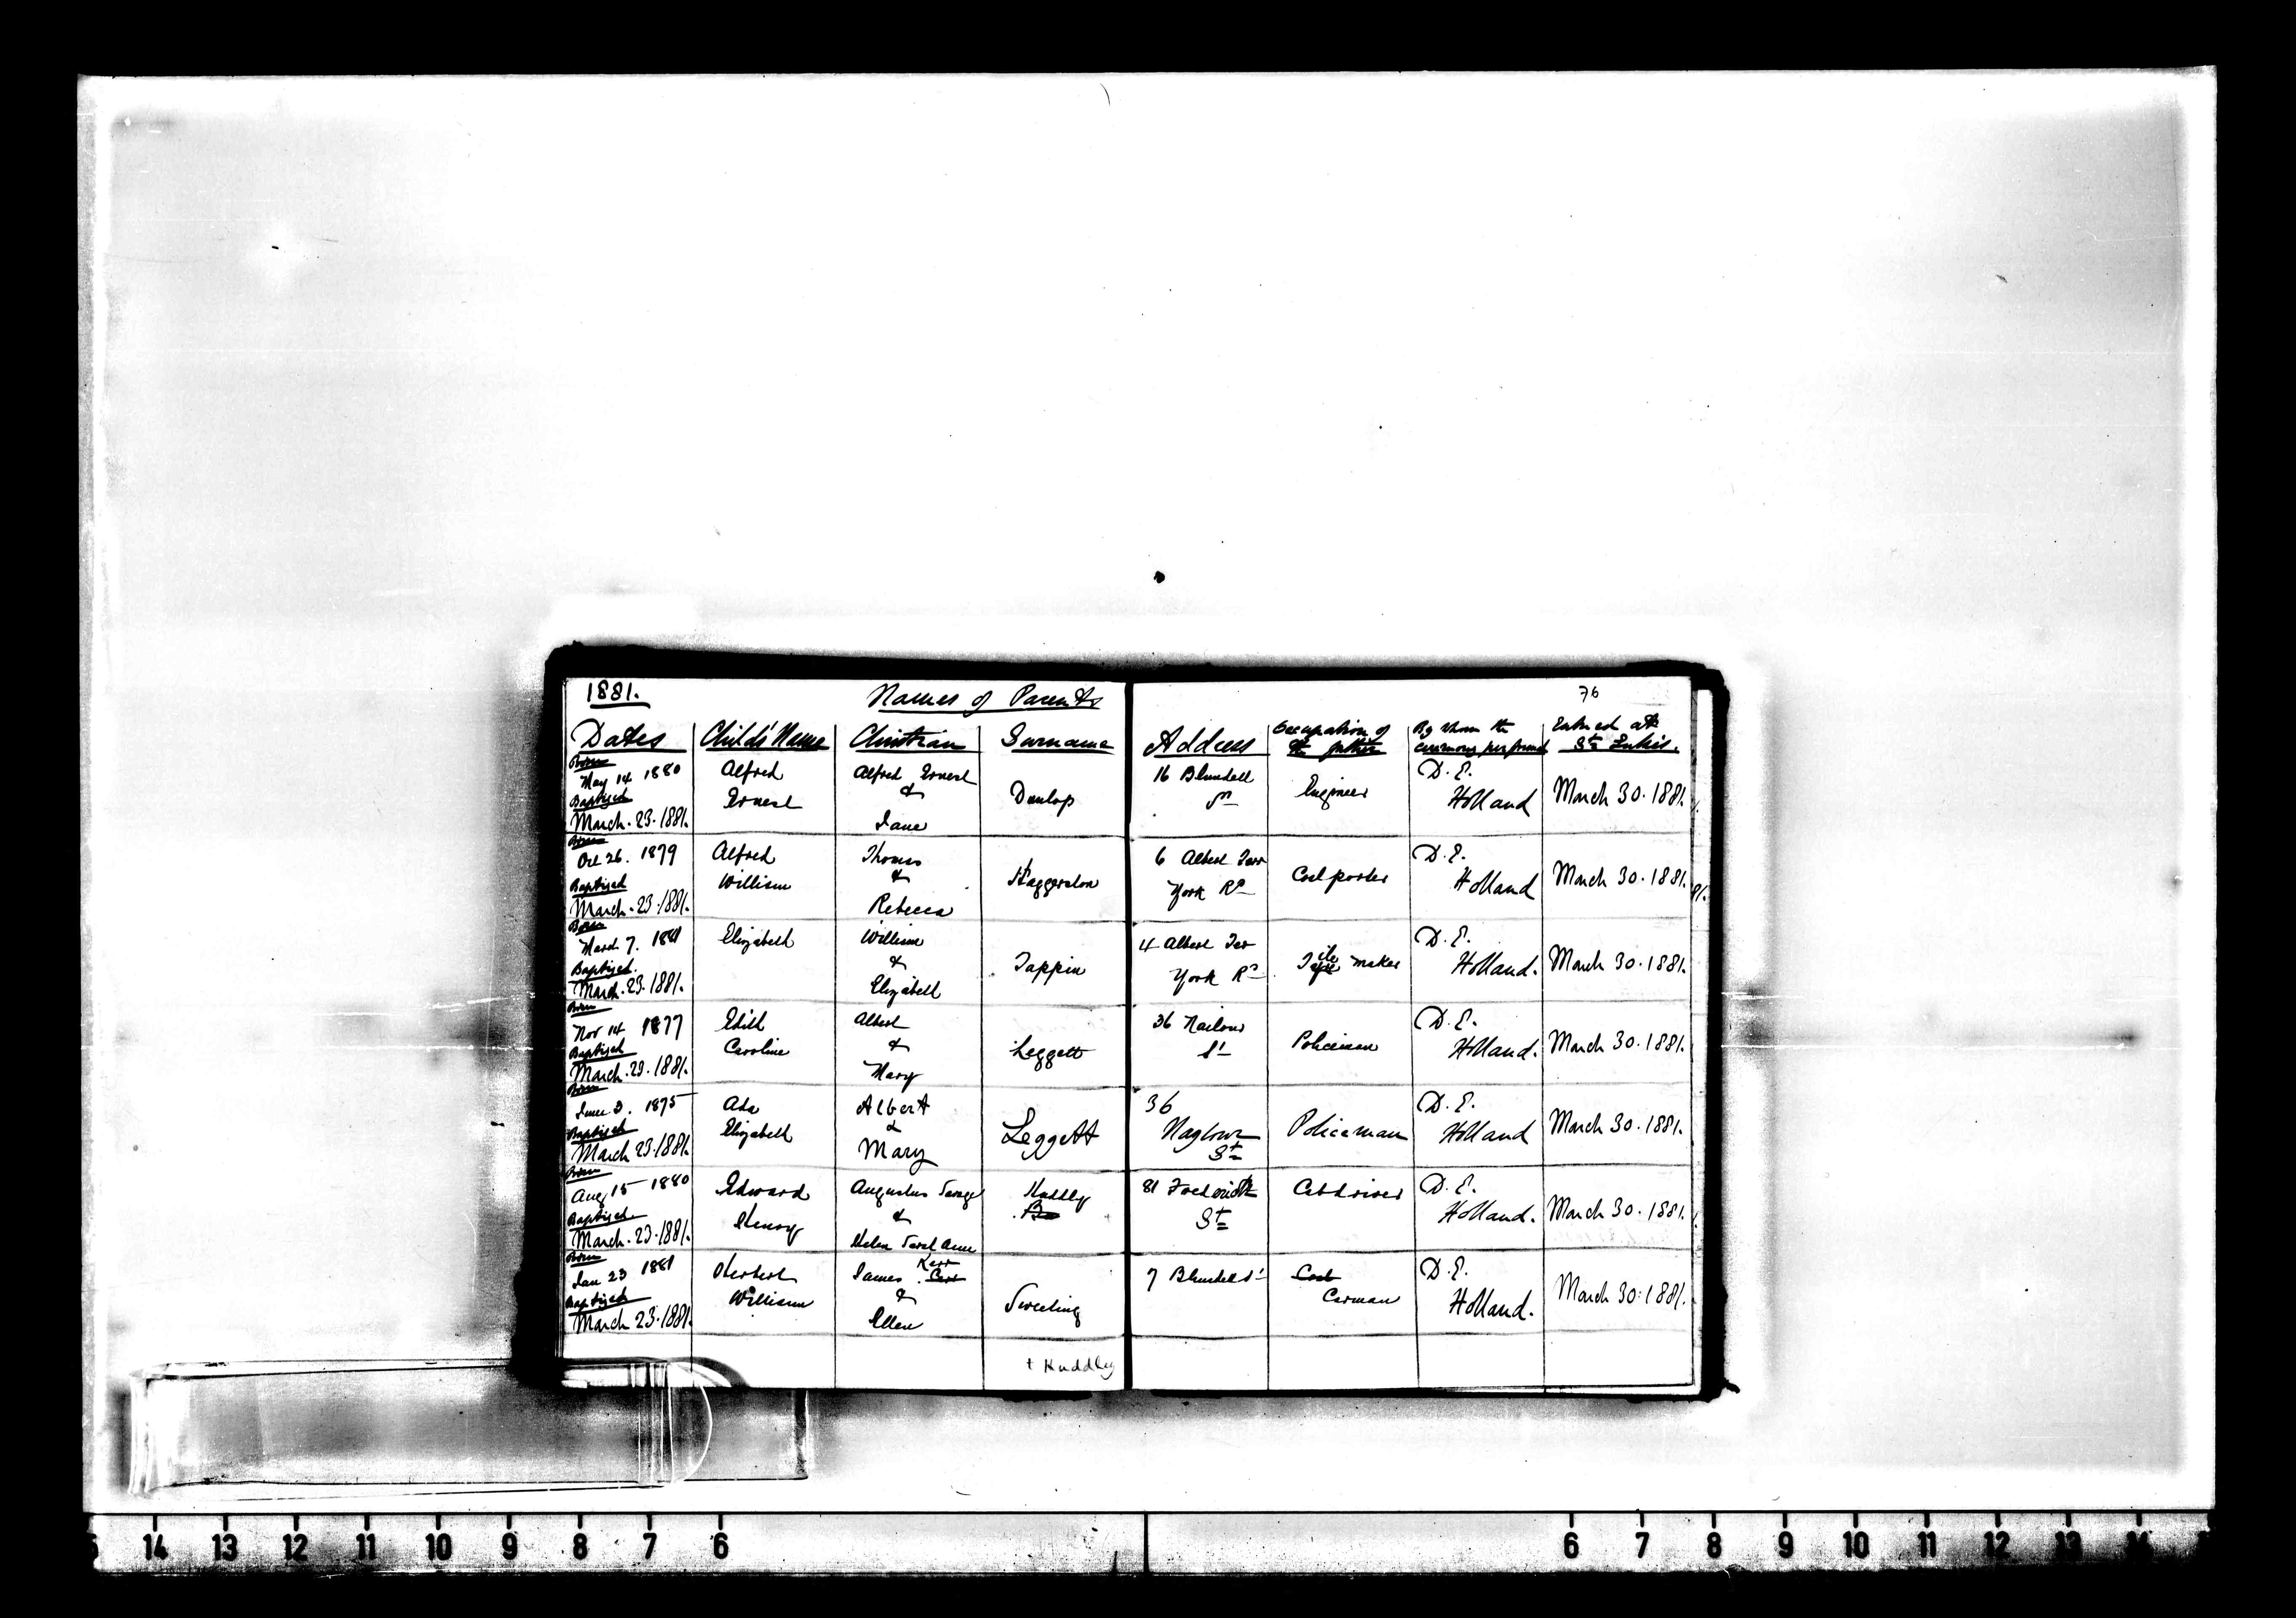 Christening record of Elizabeth Tappin in 1881